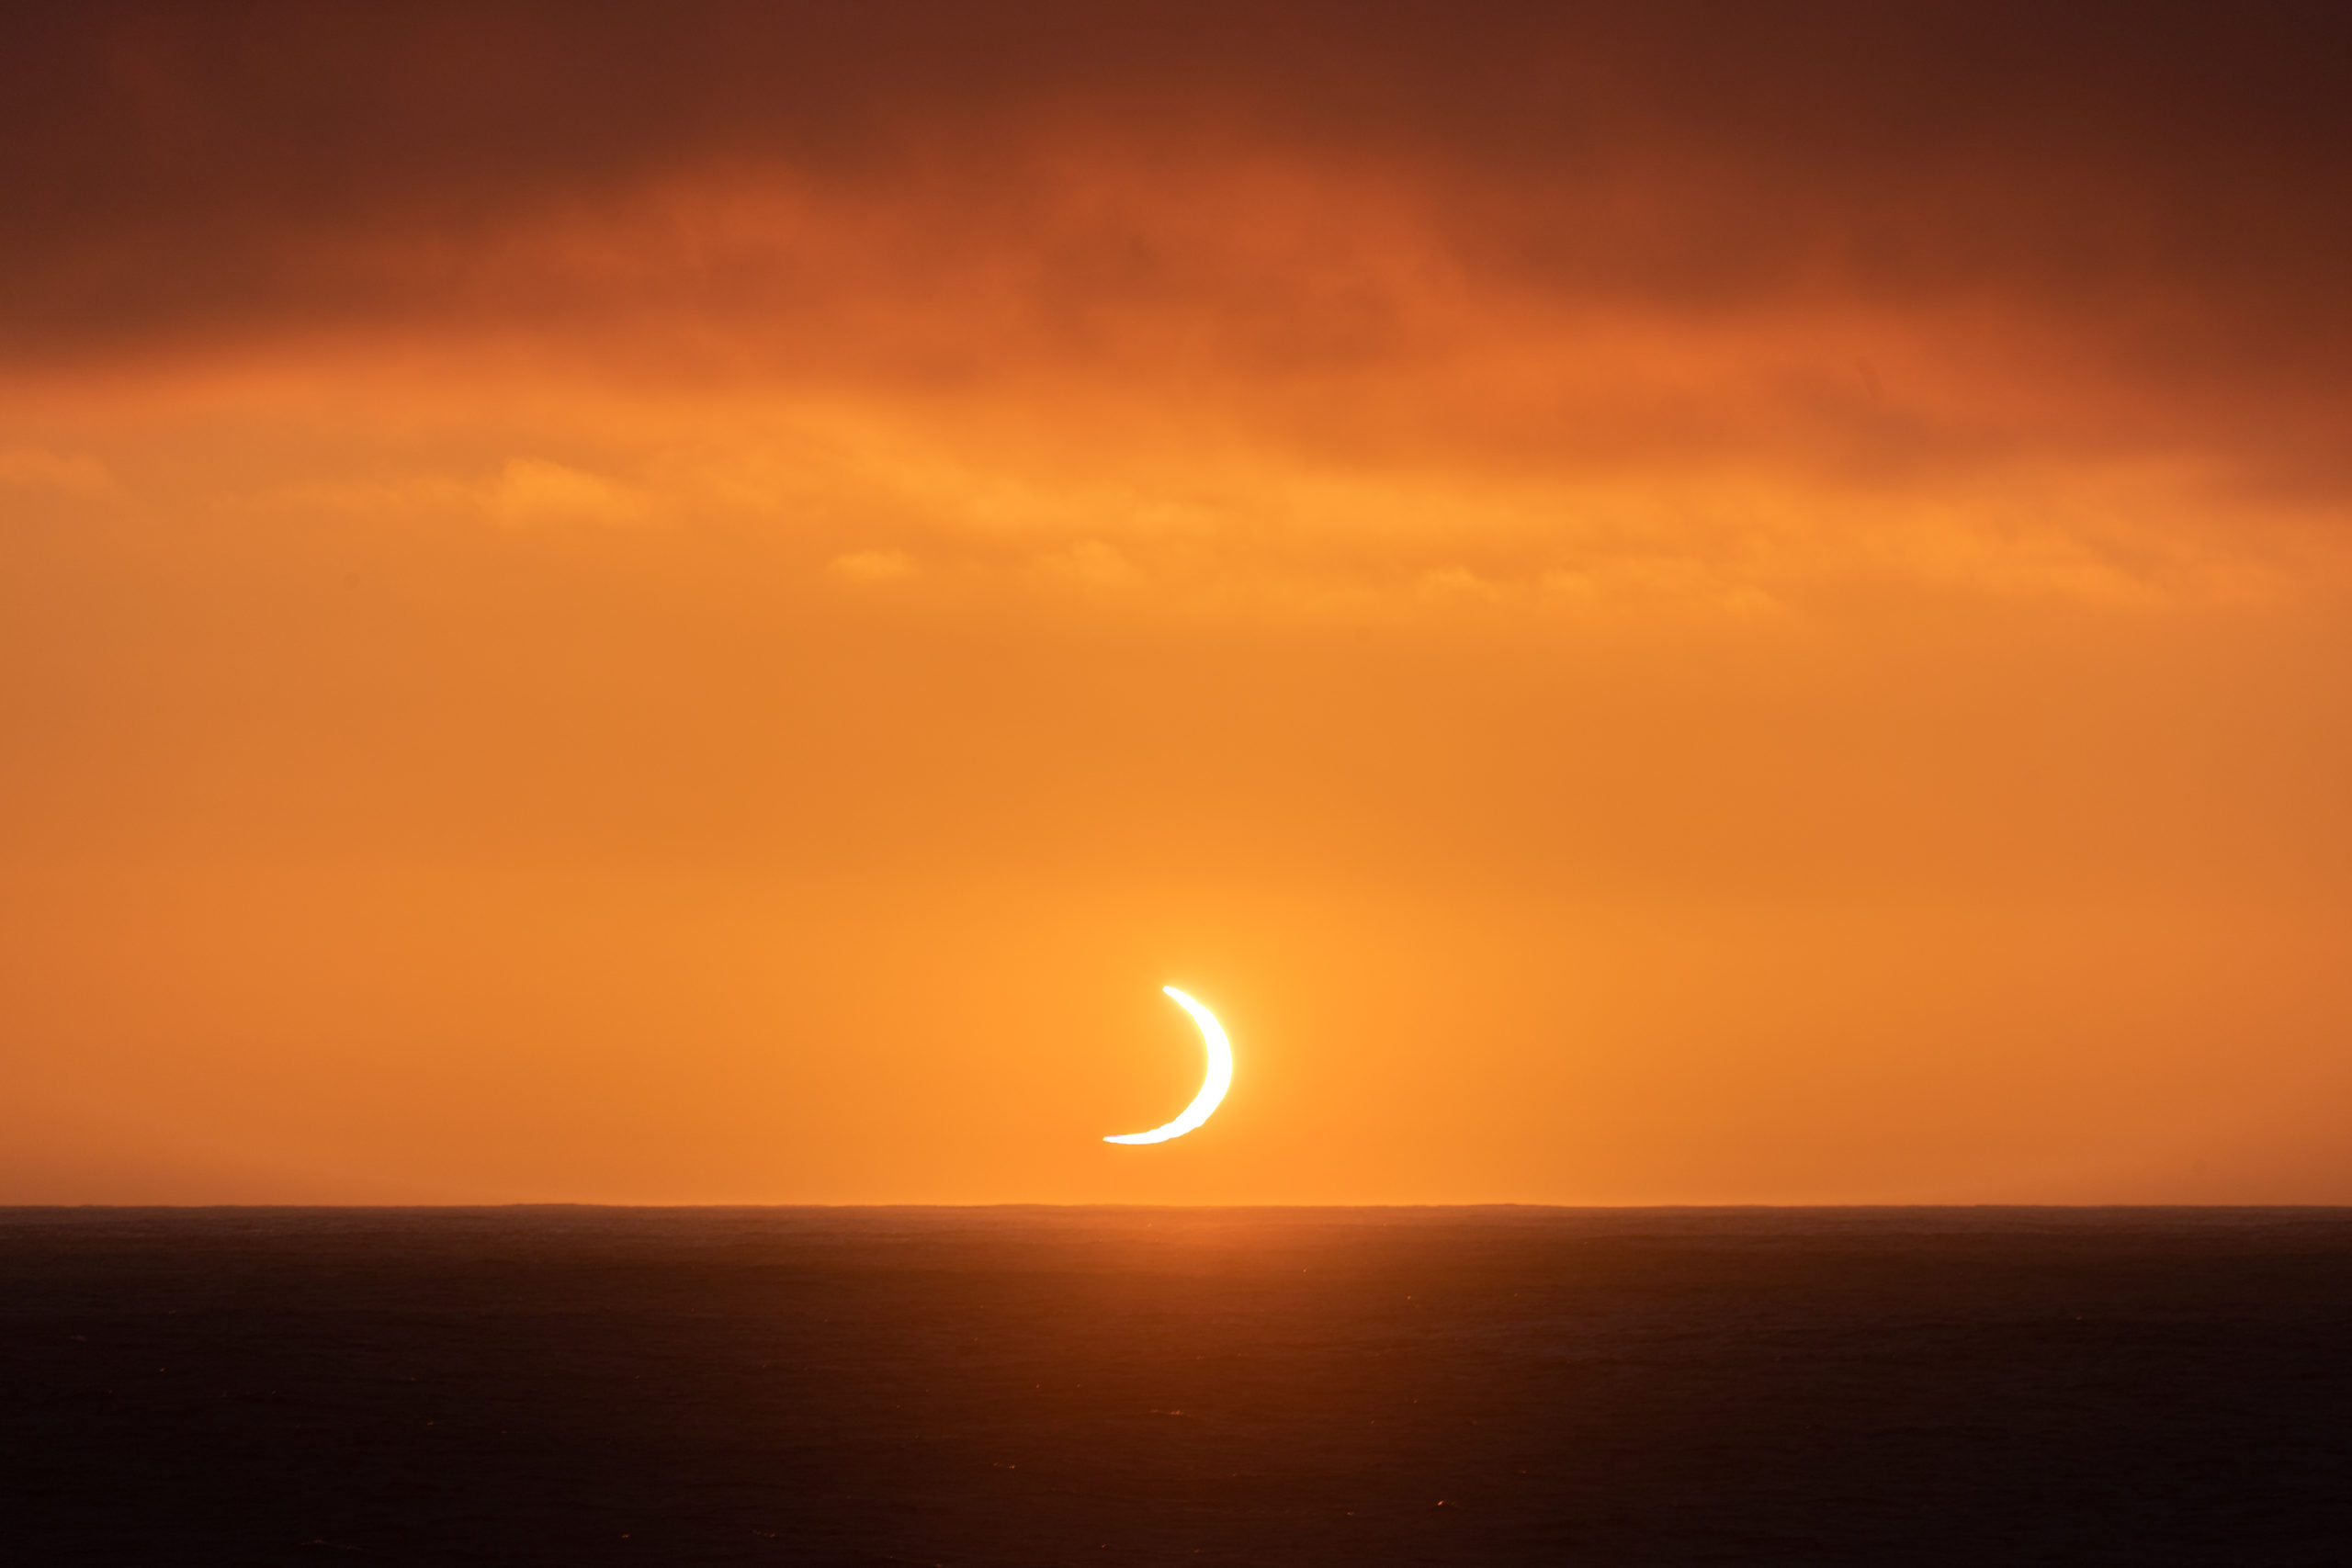 Photography of the total solar eclipse occurring just above the horizon over the ocean during sunrise in Antarctica on December 6 2021